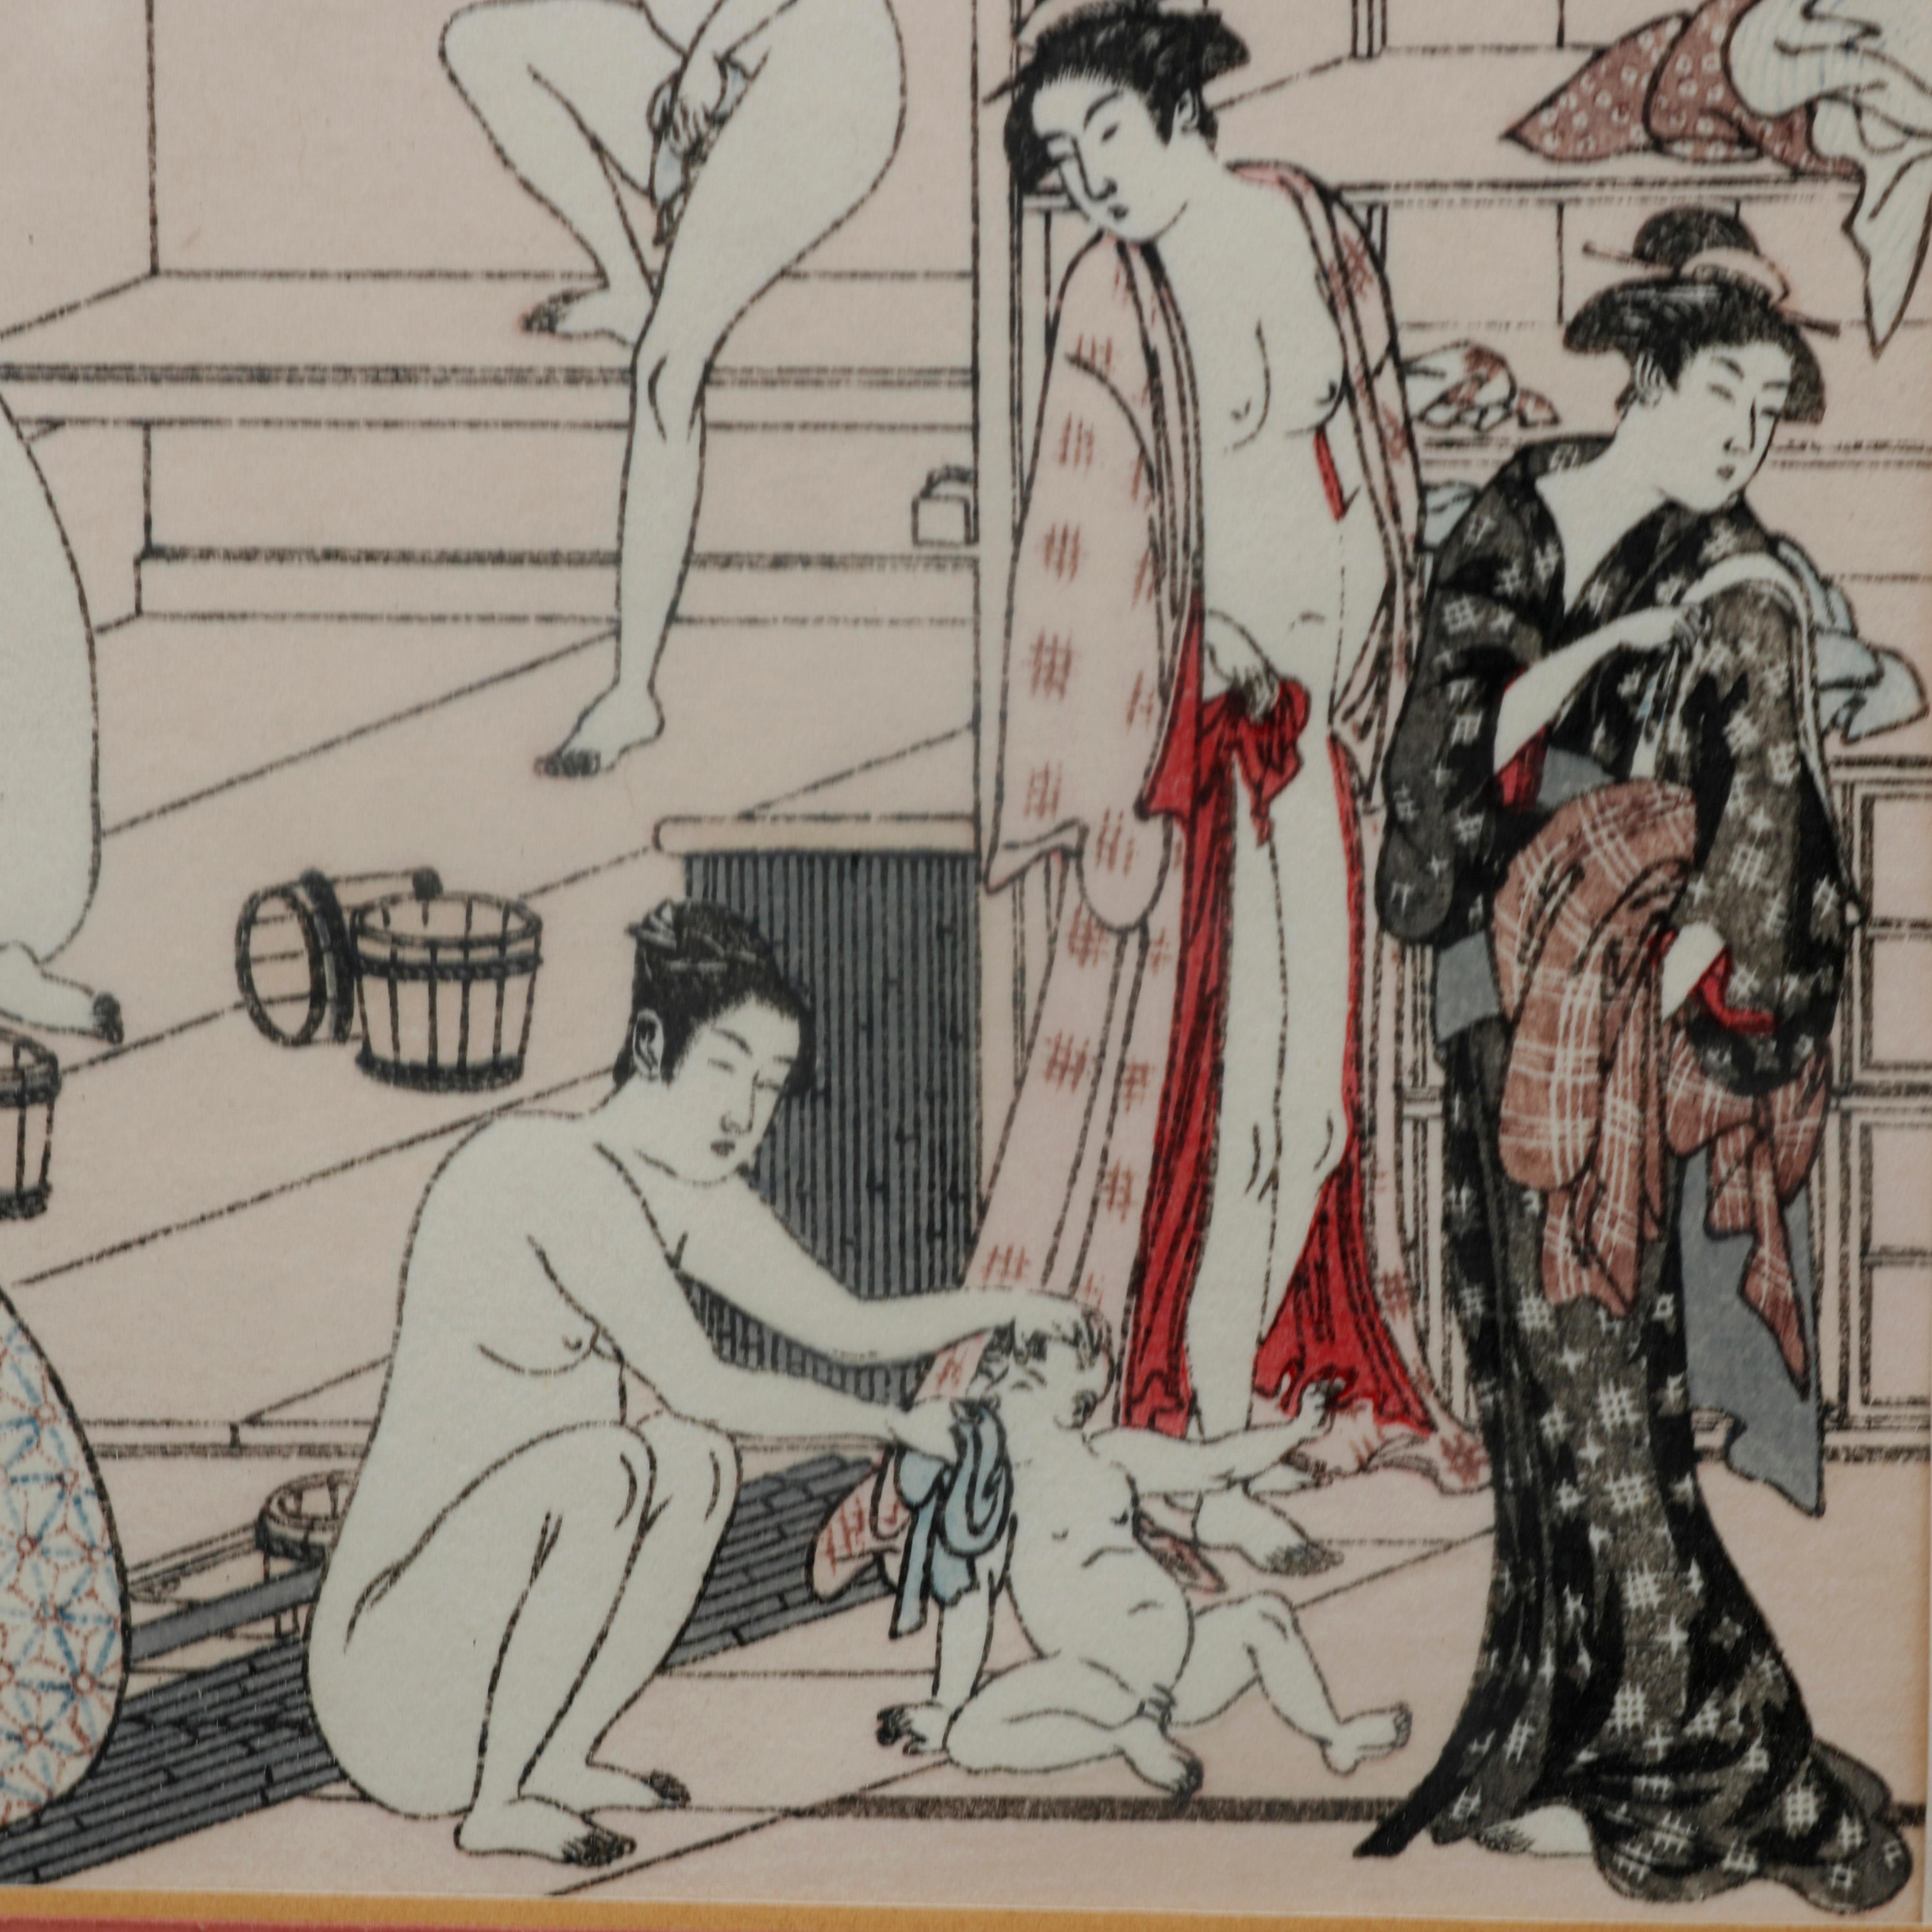 Carved Vintage Japanese Woodblock Print of Bath House with Figures, 20th Century